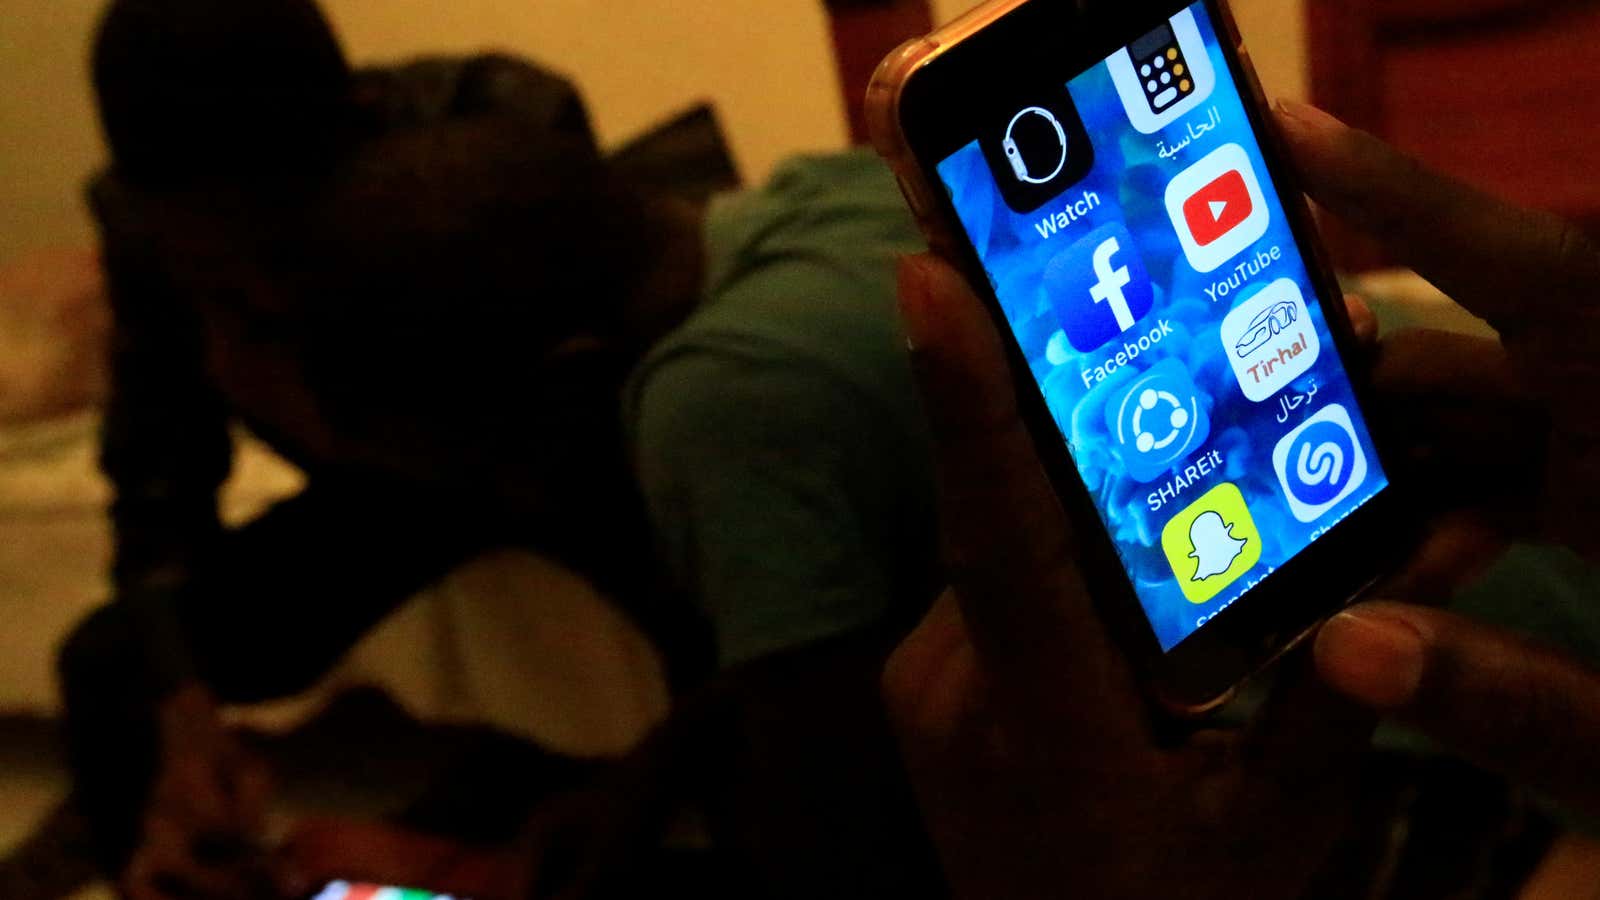 A Sudanese man holds his phone with restricted internet access social media platforms, in Khartoum, Sudan